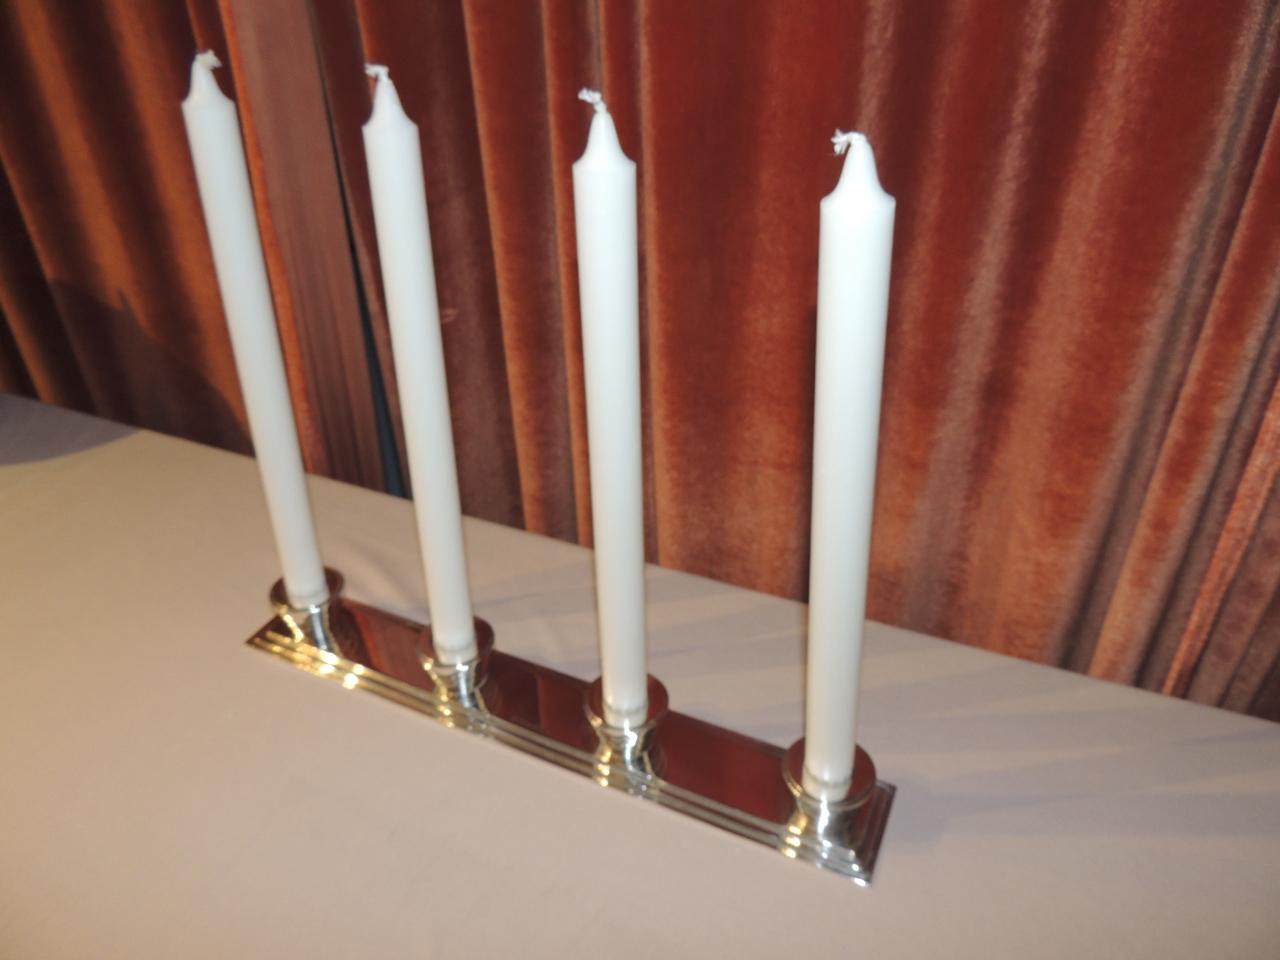 A streamlined silver candelabra elegant in its simplicity and designed by Luc Lanel for the renowned company Christofle.

Silver plating over bronze makes this exceptionally weighted and substantial. The decorative element is a series of stepped